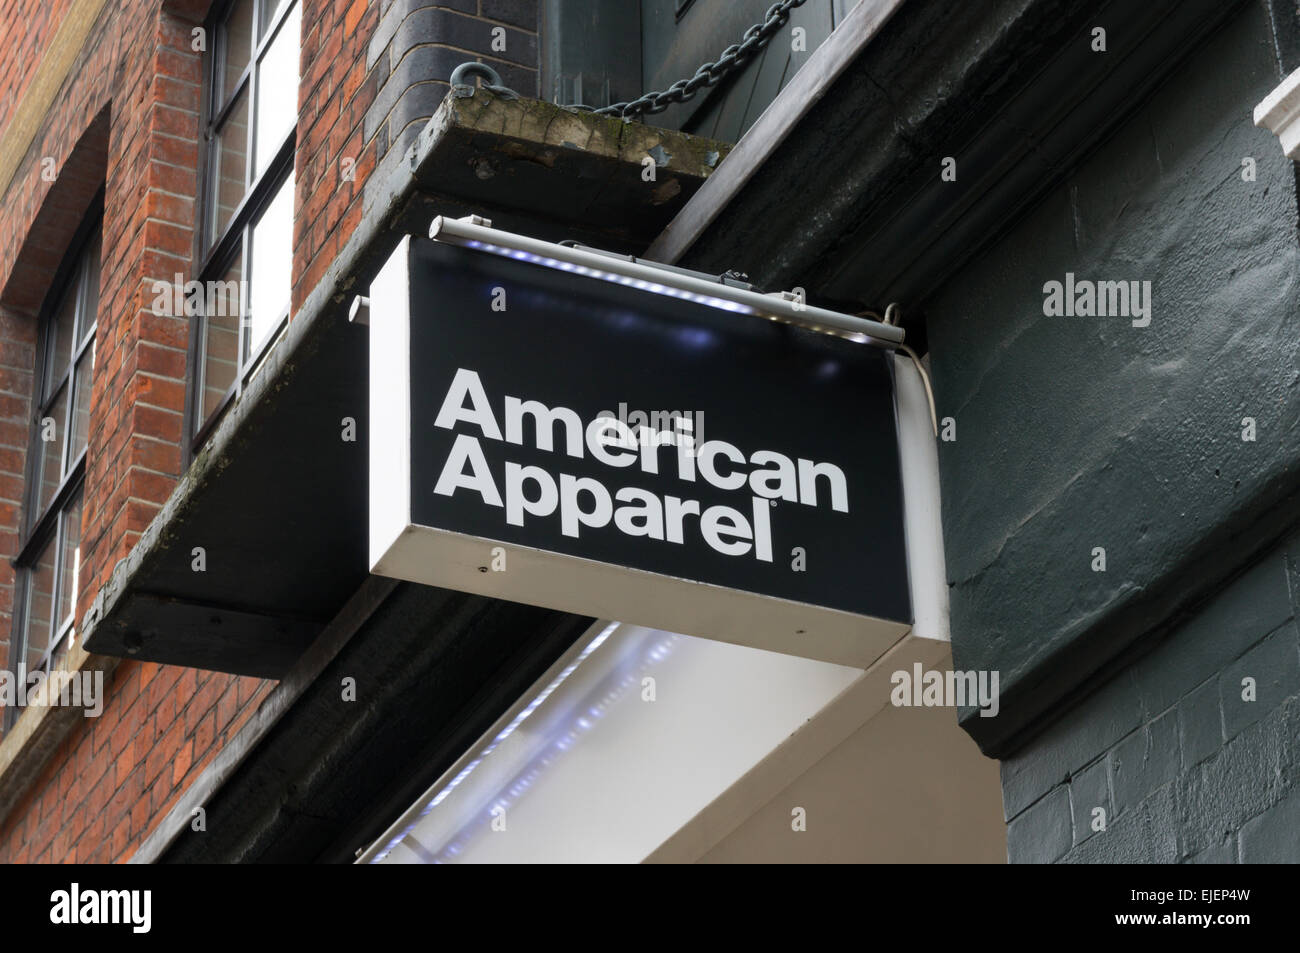 American Apparel sign on shop in Covent Garden, London. Stock Photo